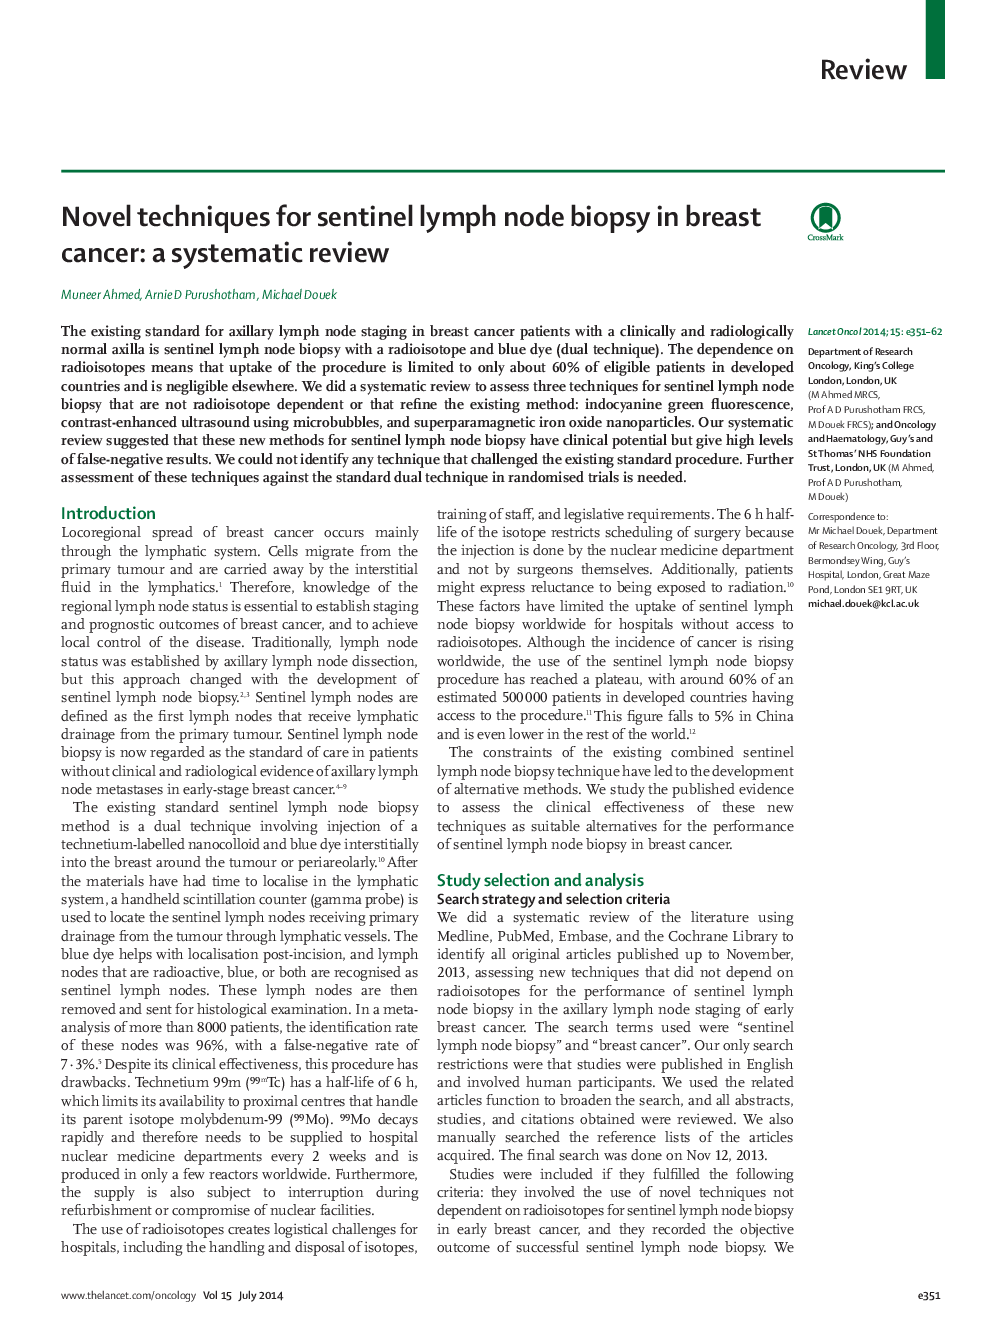 Novel techniques for sentinel lymph node biopsy in breast cancer: a systematic review